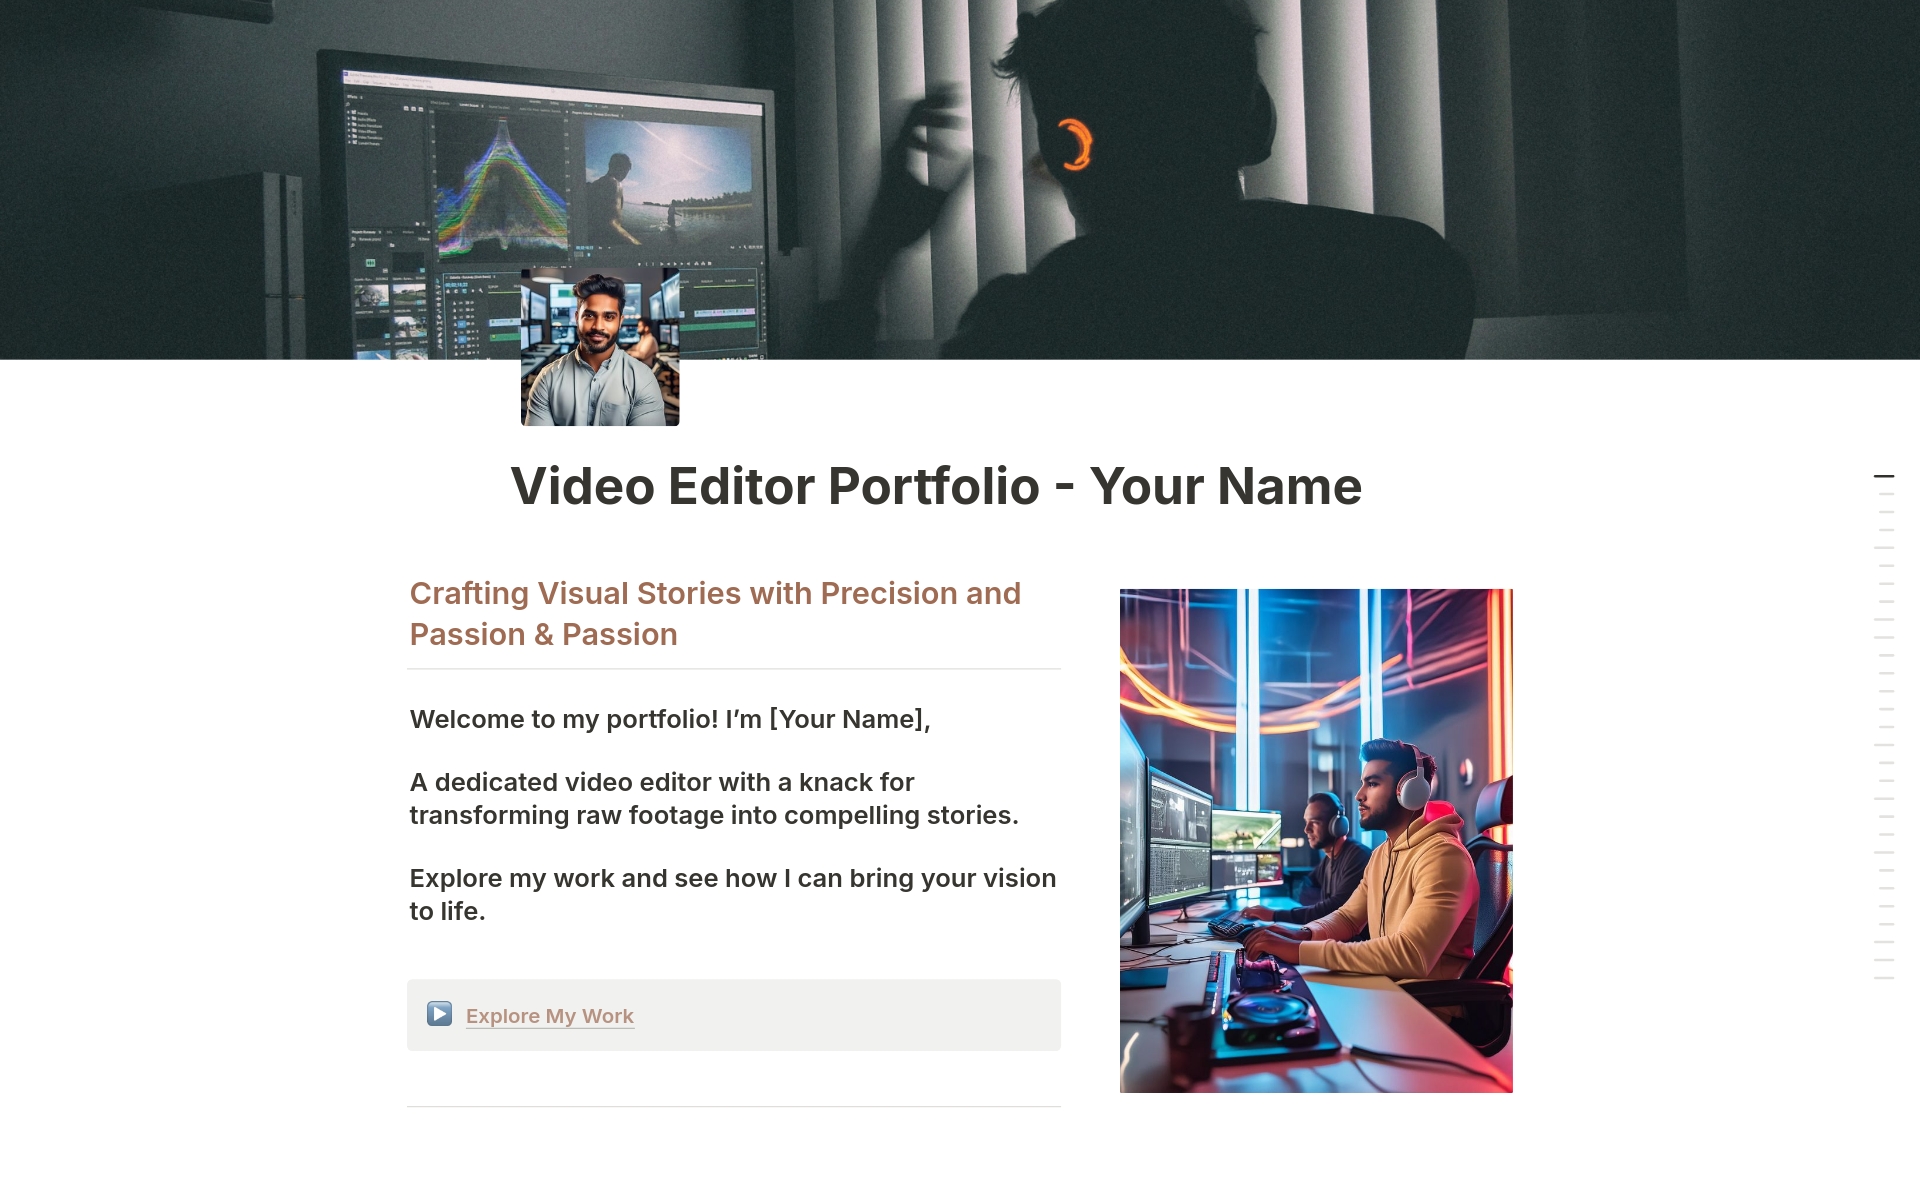 An outstanding portfolio is essential for any video editor. It showcases your skills, style, and versatility, making it easier to attract freelance clients or secure a video editing job.